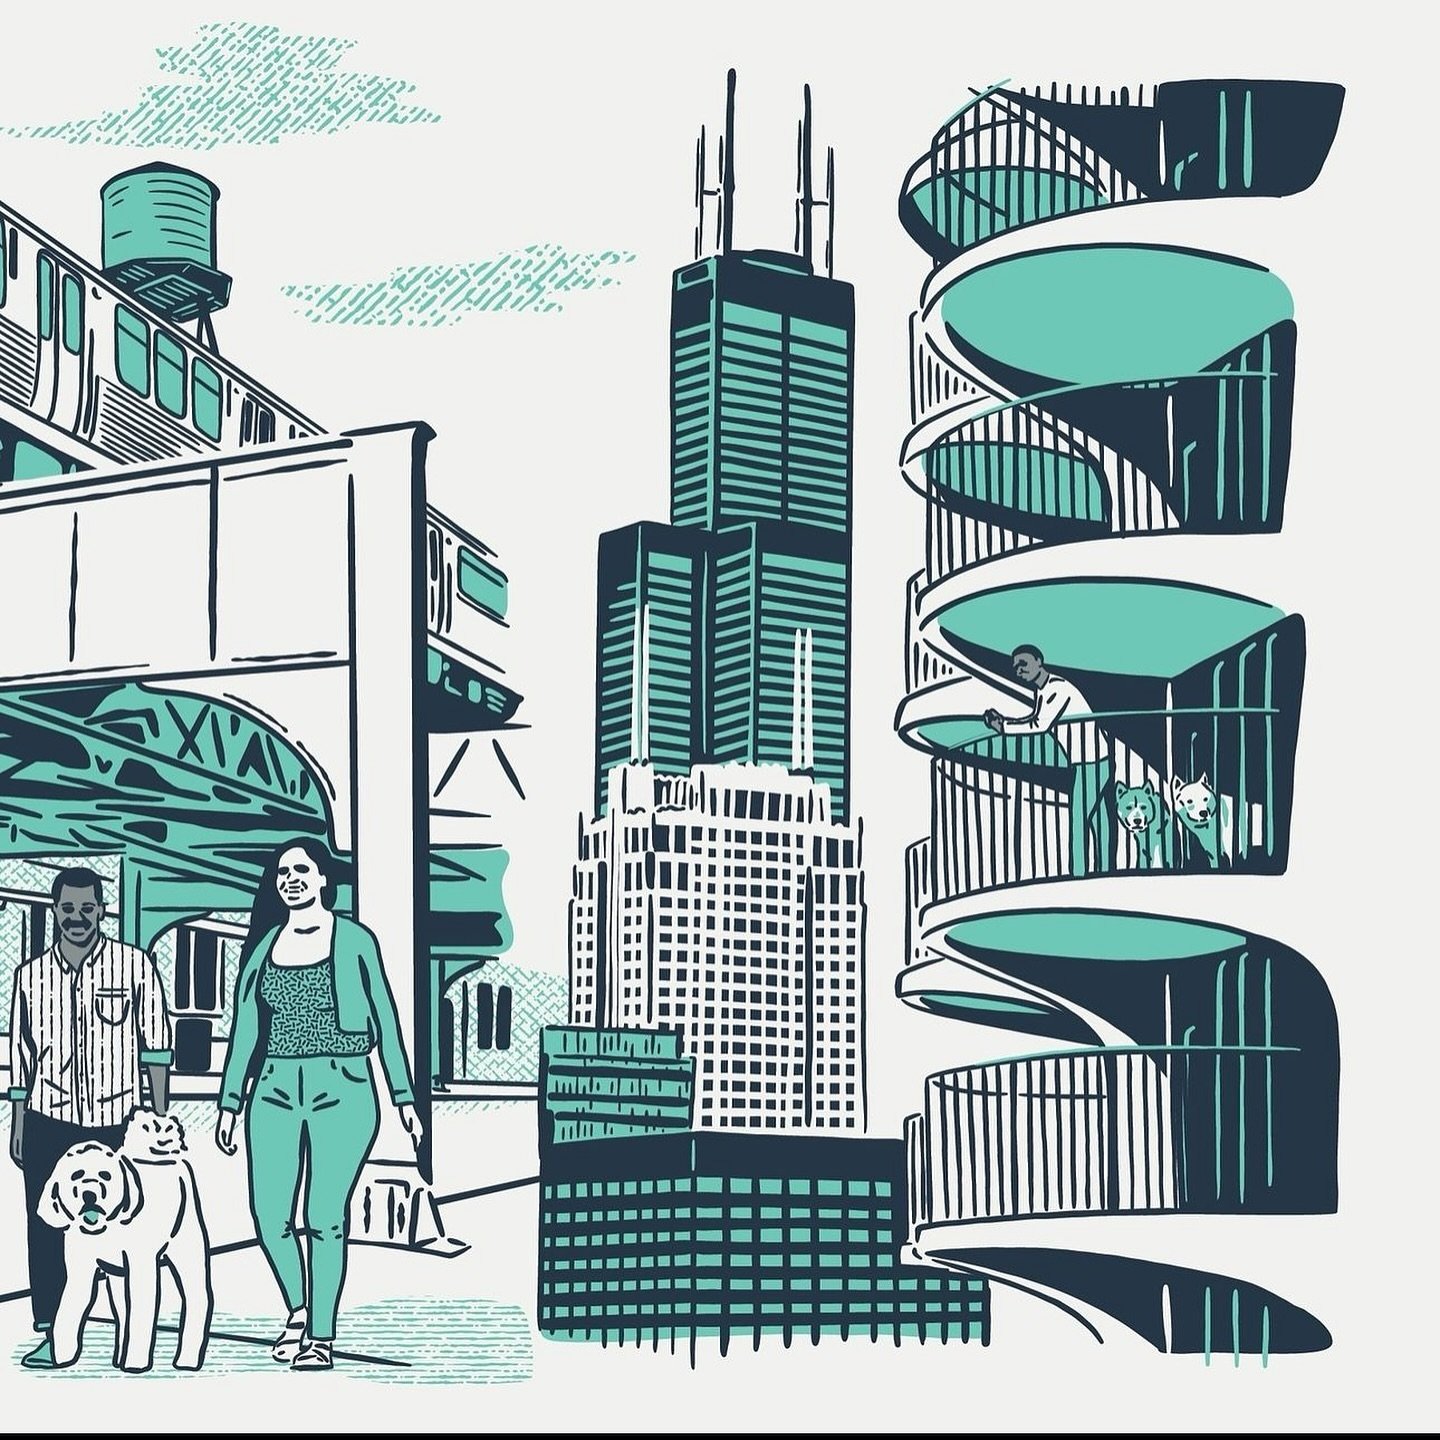 We&rsquo;re thrilled to share the fourth installment of our BLVD illustration series from @studiomalt and @chgohoods This time, honoring BLVD Vet River North 🏙️ It&rsquo;s such a joy collaborating with other local creatives to sprinkle a little some